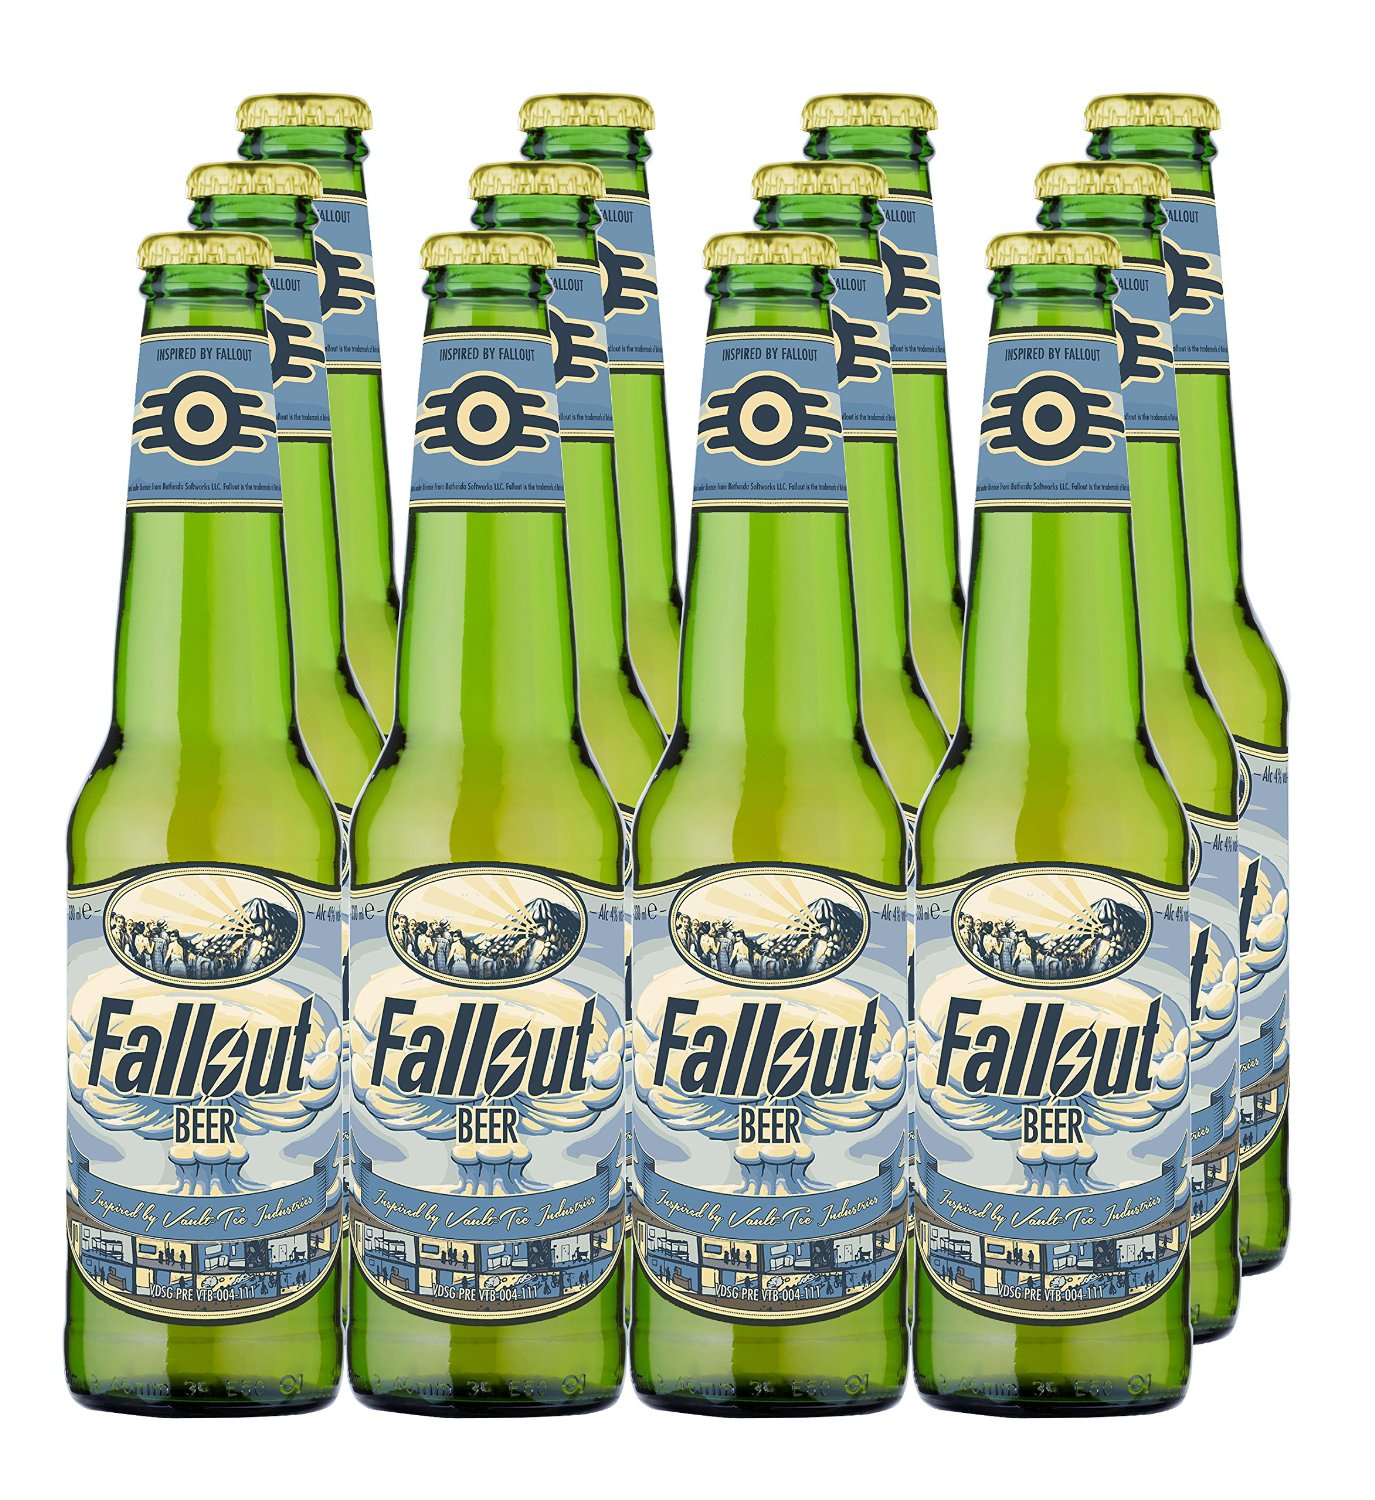 Soon, You’ll Actually Be Able to Purchase Fallout 4 Beer and Nuka-Cola Quantum